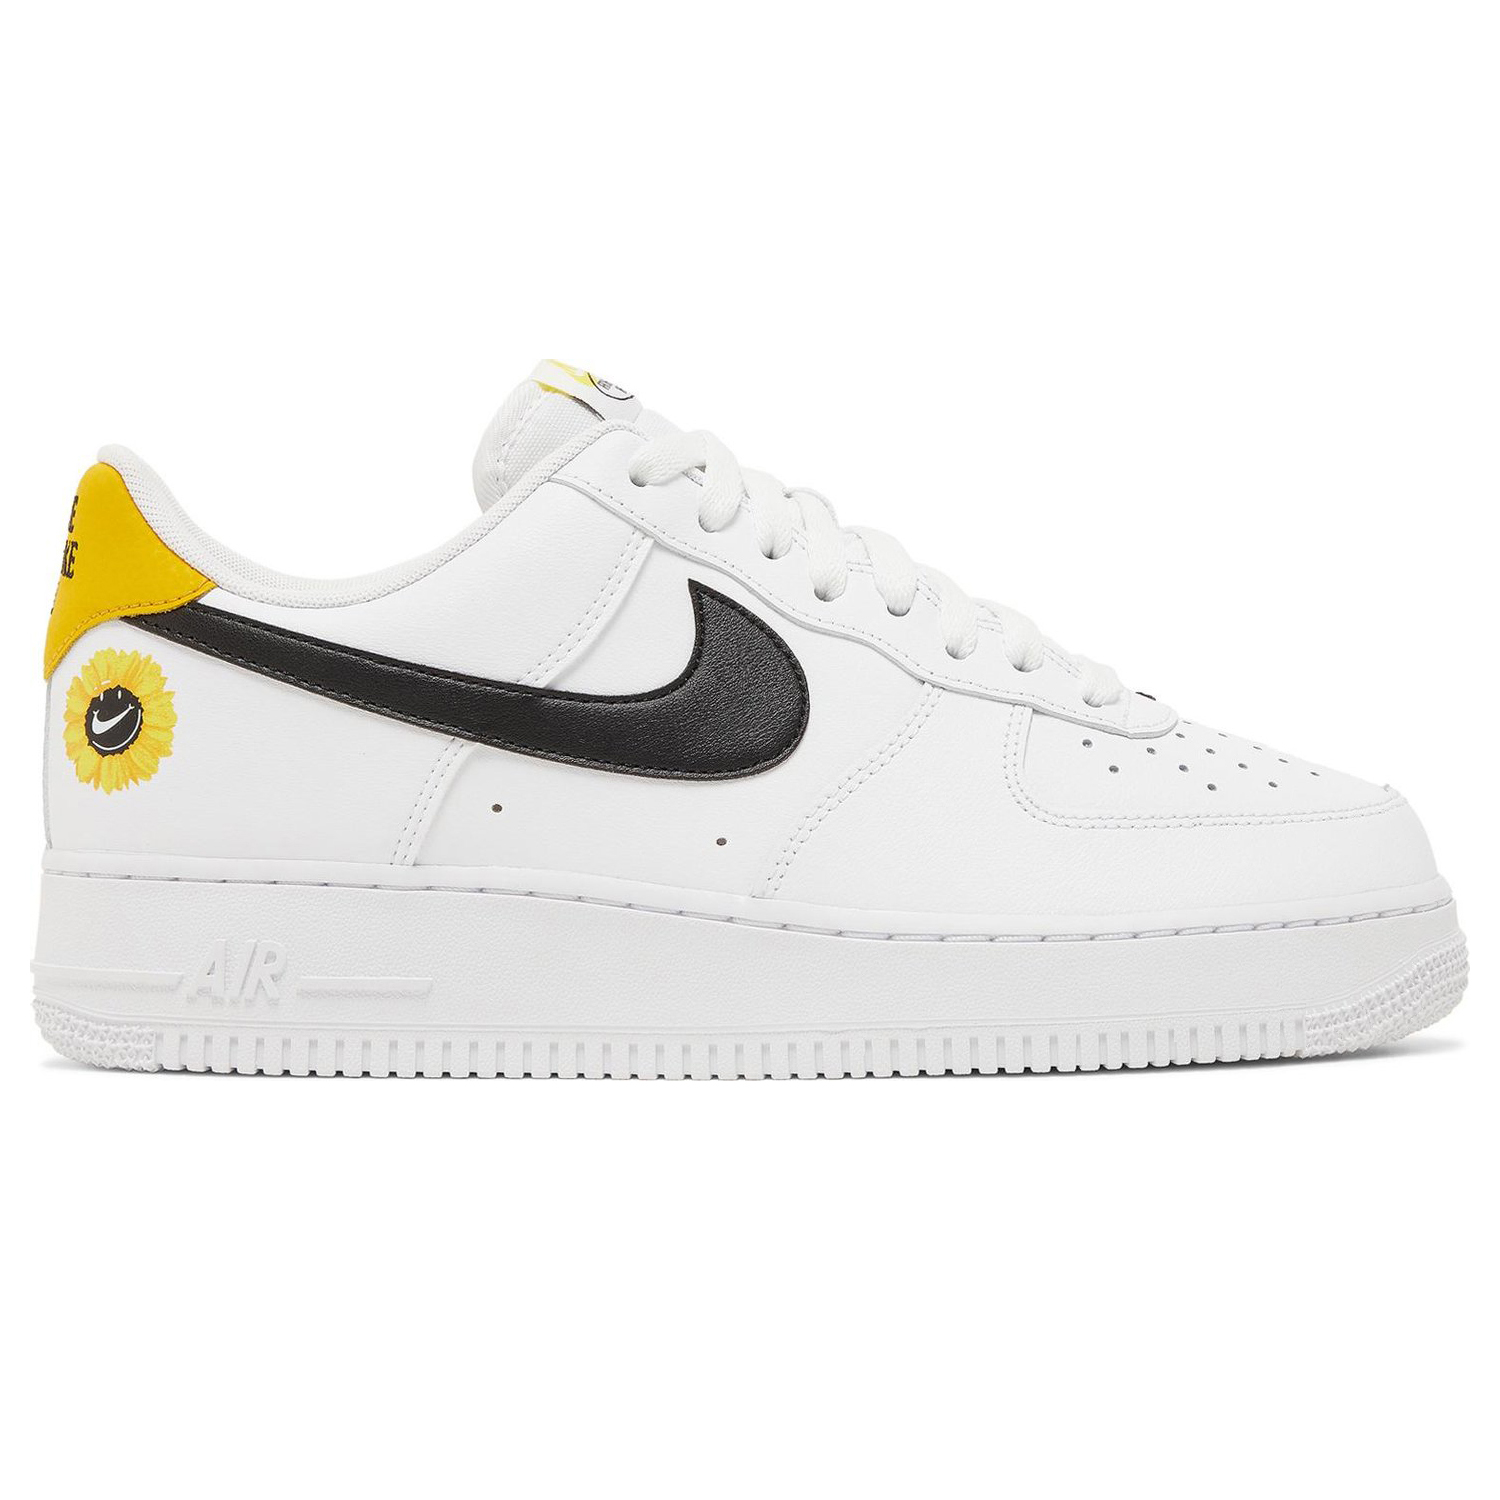 Кроссовки Nike Air Force 1 '07 LV8 2 'Have A Nike Day', белый